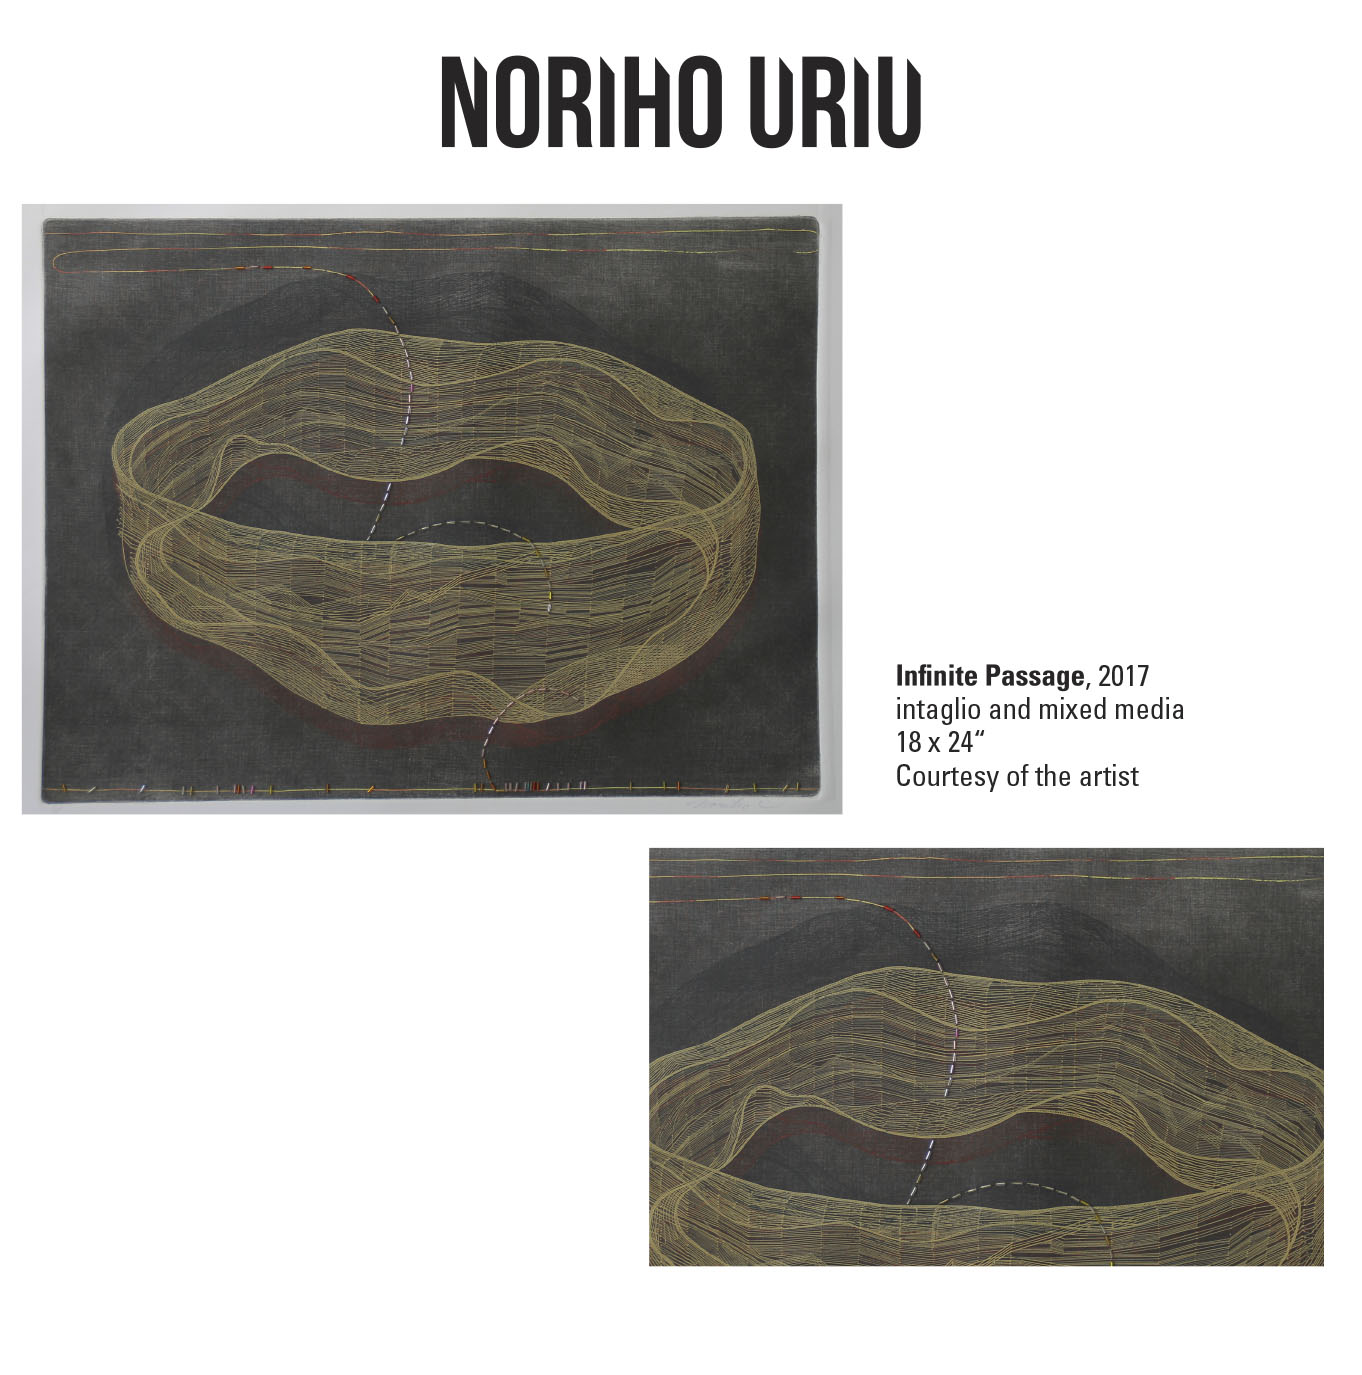 Noriho Uriu, Infinite Passage, 2017. Intaglio and mixed media. 18 x 24“ Courtesy of the artist. A oval shaped object made up of various lines with a dashed line running through the center.